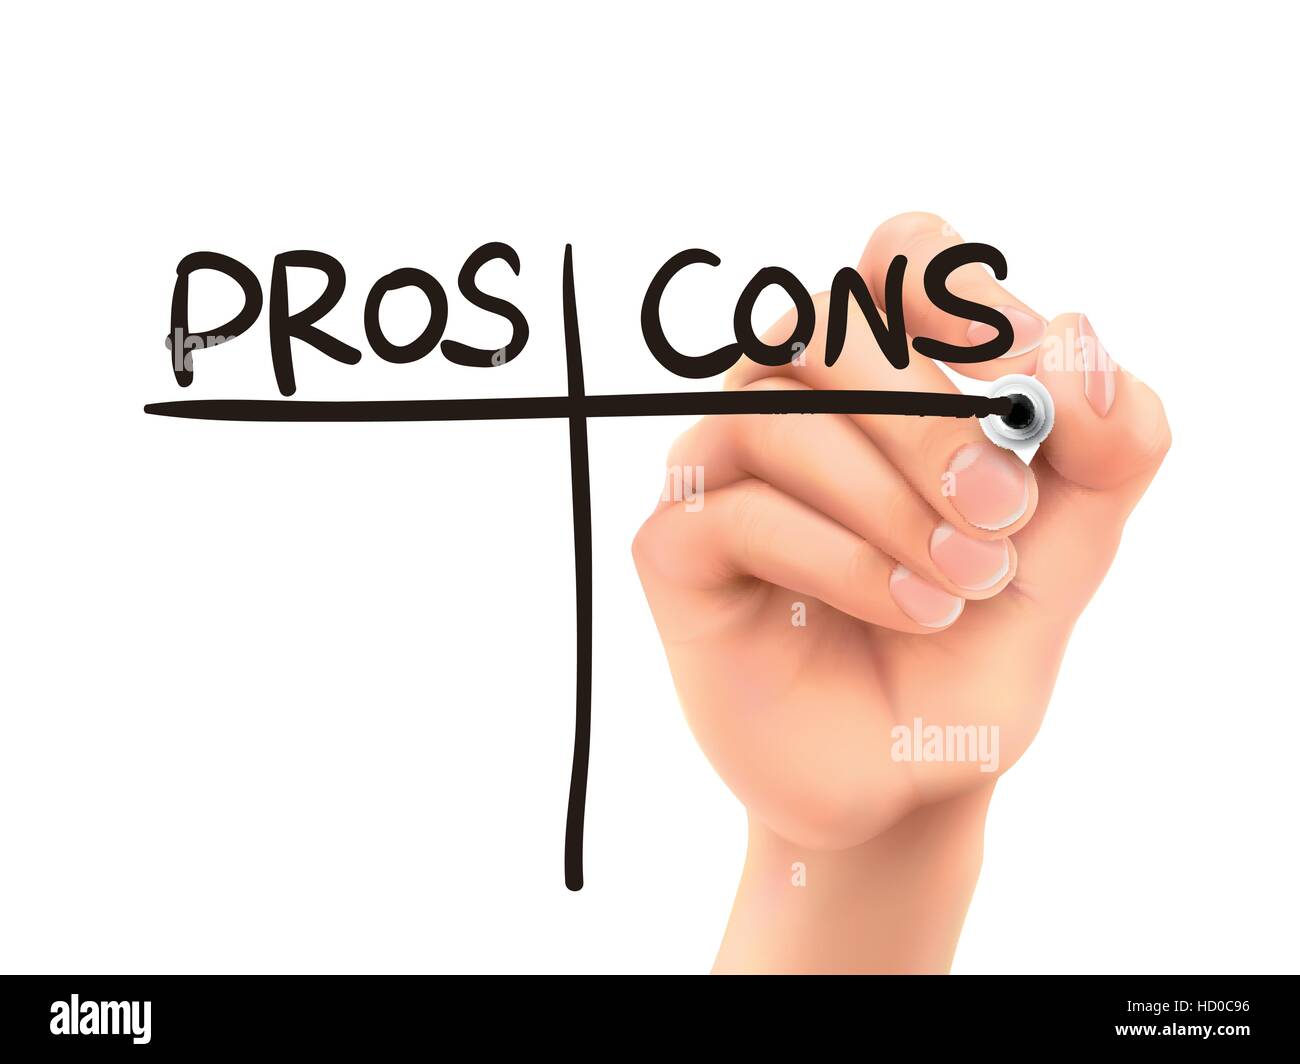 pros and cons words written by hand on a transparent board Stock Vector